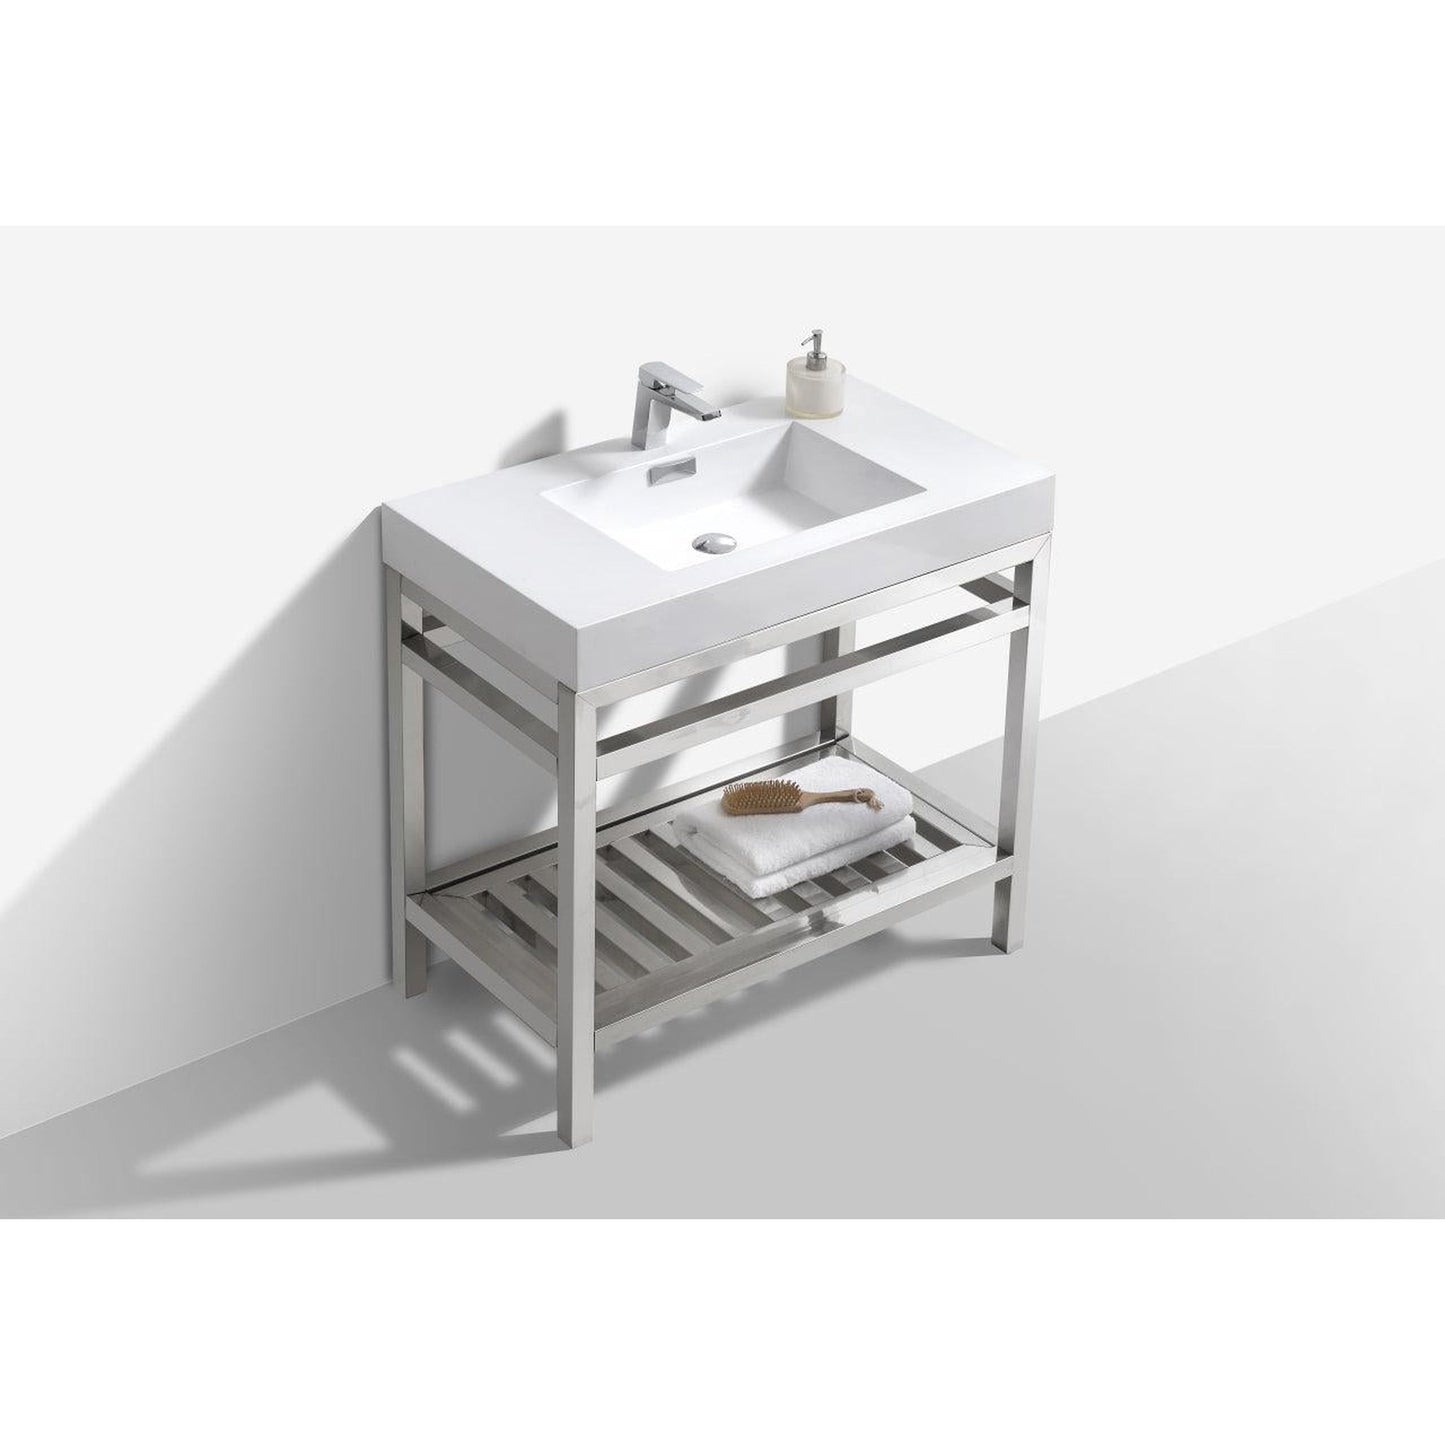 KubeBath Cisco 36" Stainless Steel Chrome Console Freestanding Modern Bathroom Vanity With Single Integrated Acrylic Sink With Overflow and 36" White Framed Mirror